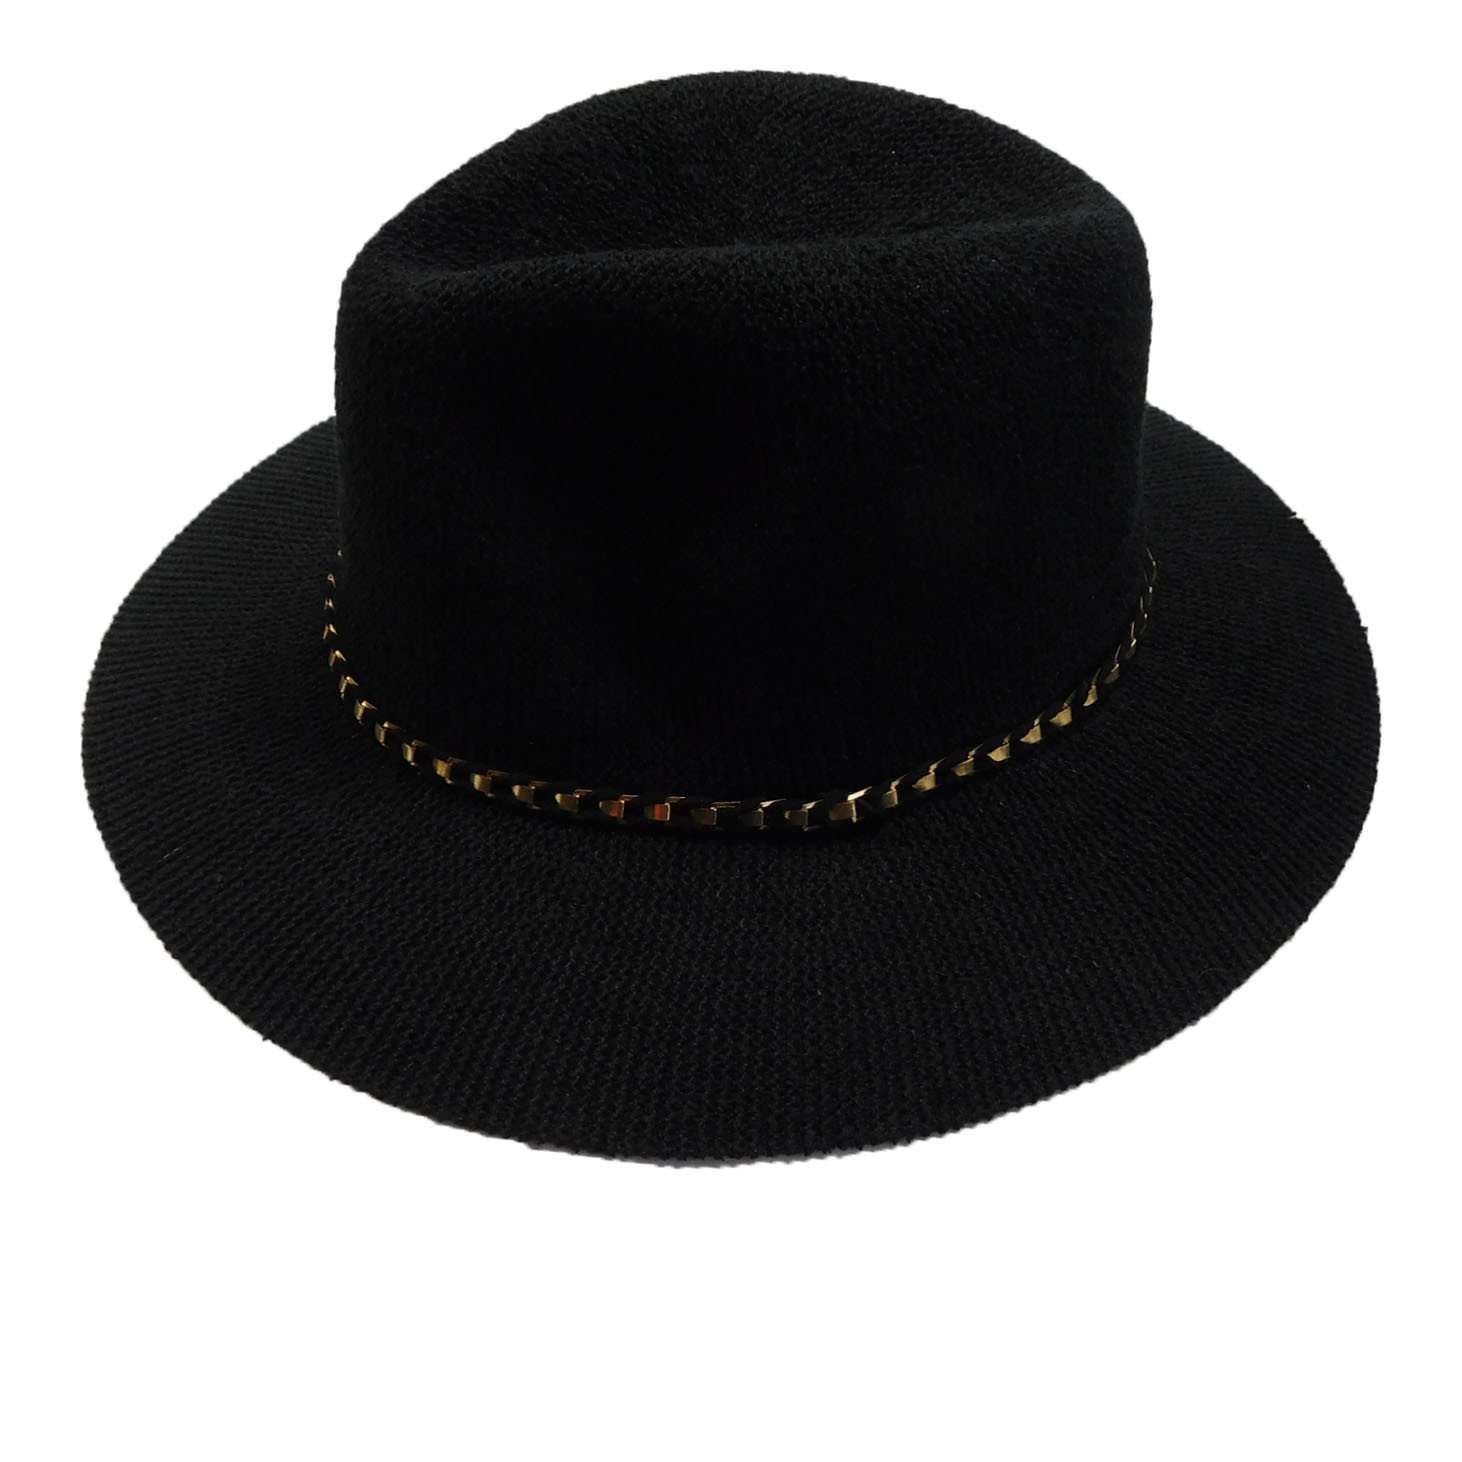 Knitted Panama Hat with Gold Band - Black Safari Hat Boardwalk Style Hats    